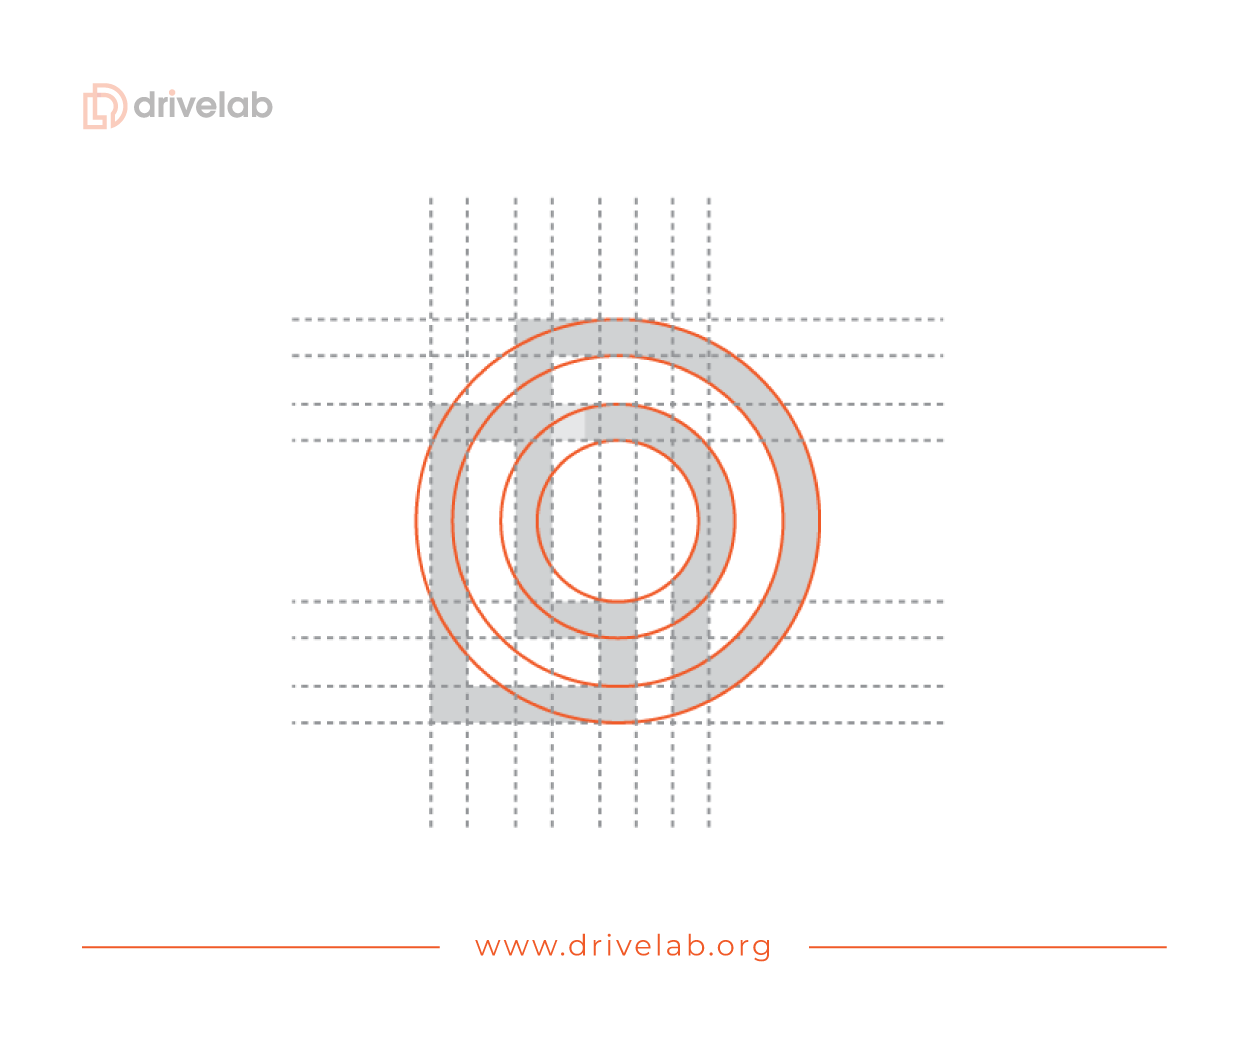 DriveLab the Design and Research of In-Vehicle Experiences Lab Symbol Explanation Image